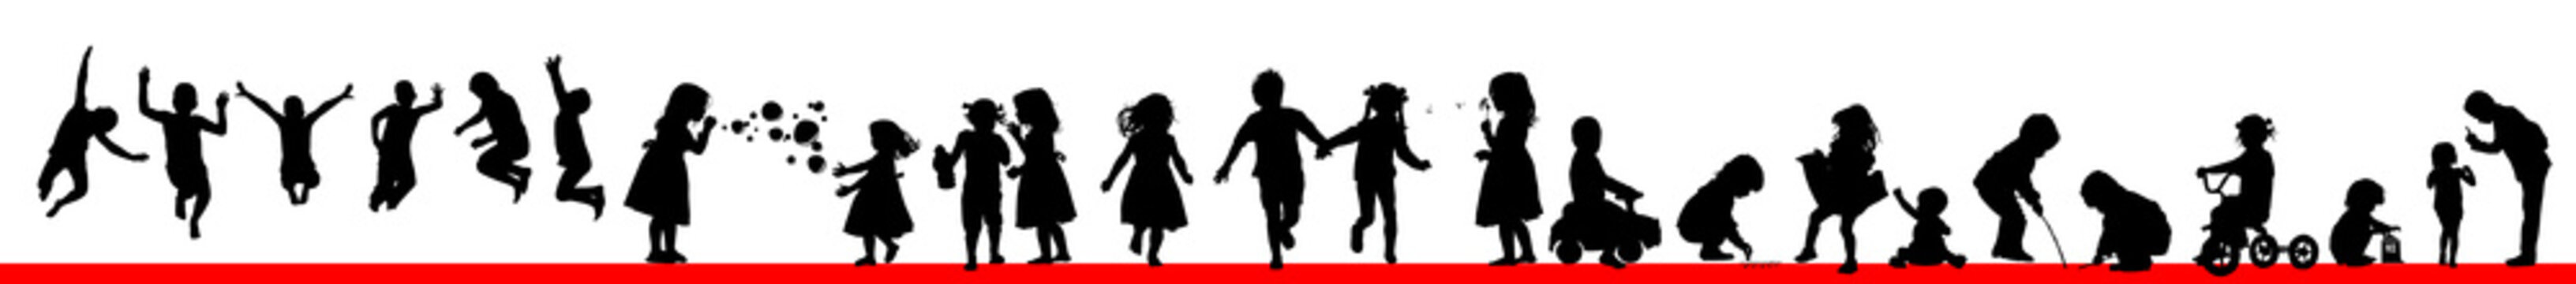 A set of silhouettes of children. Happy childhood. Vector illustration